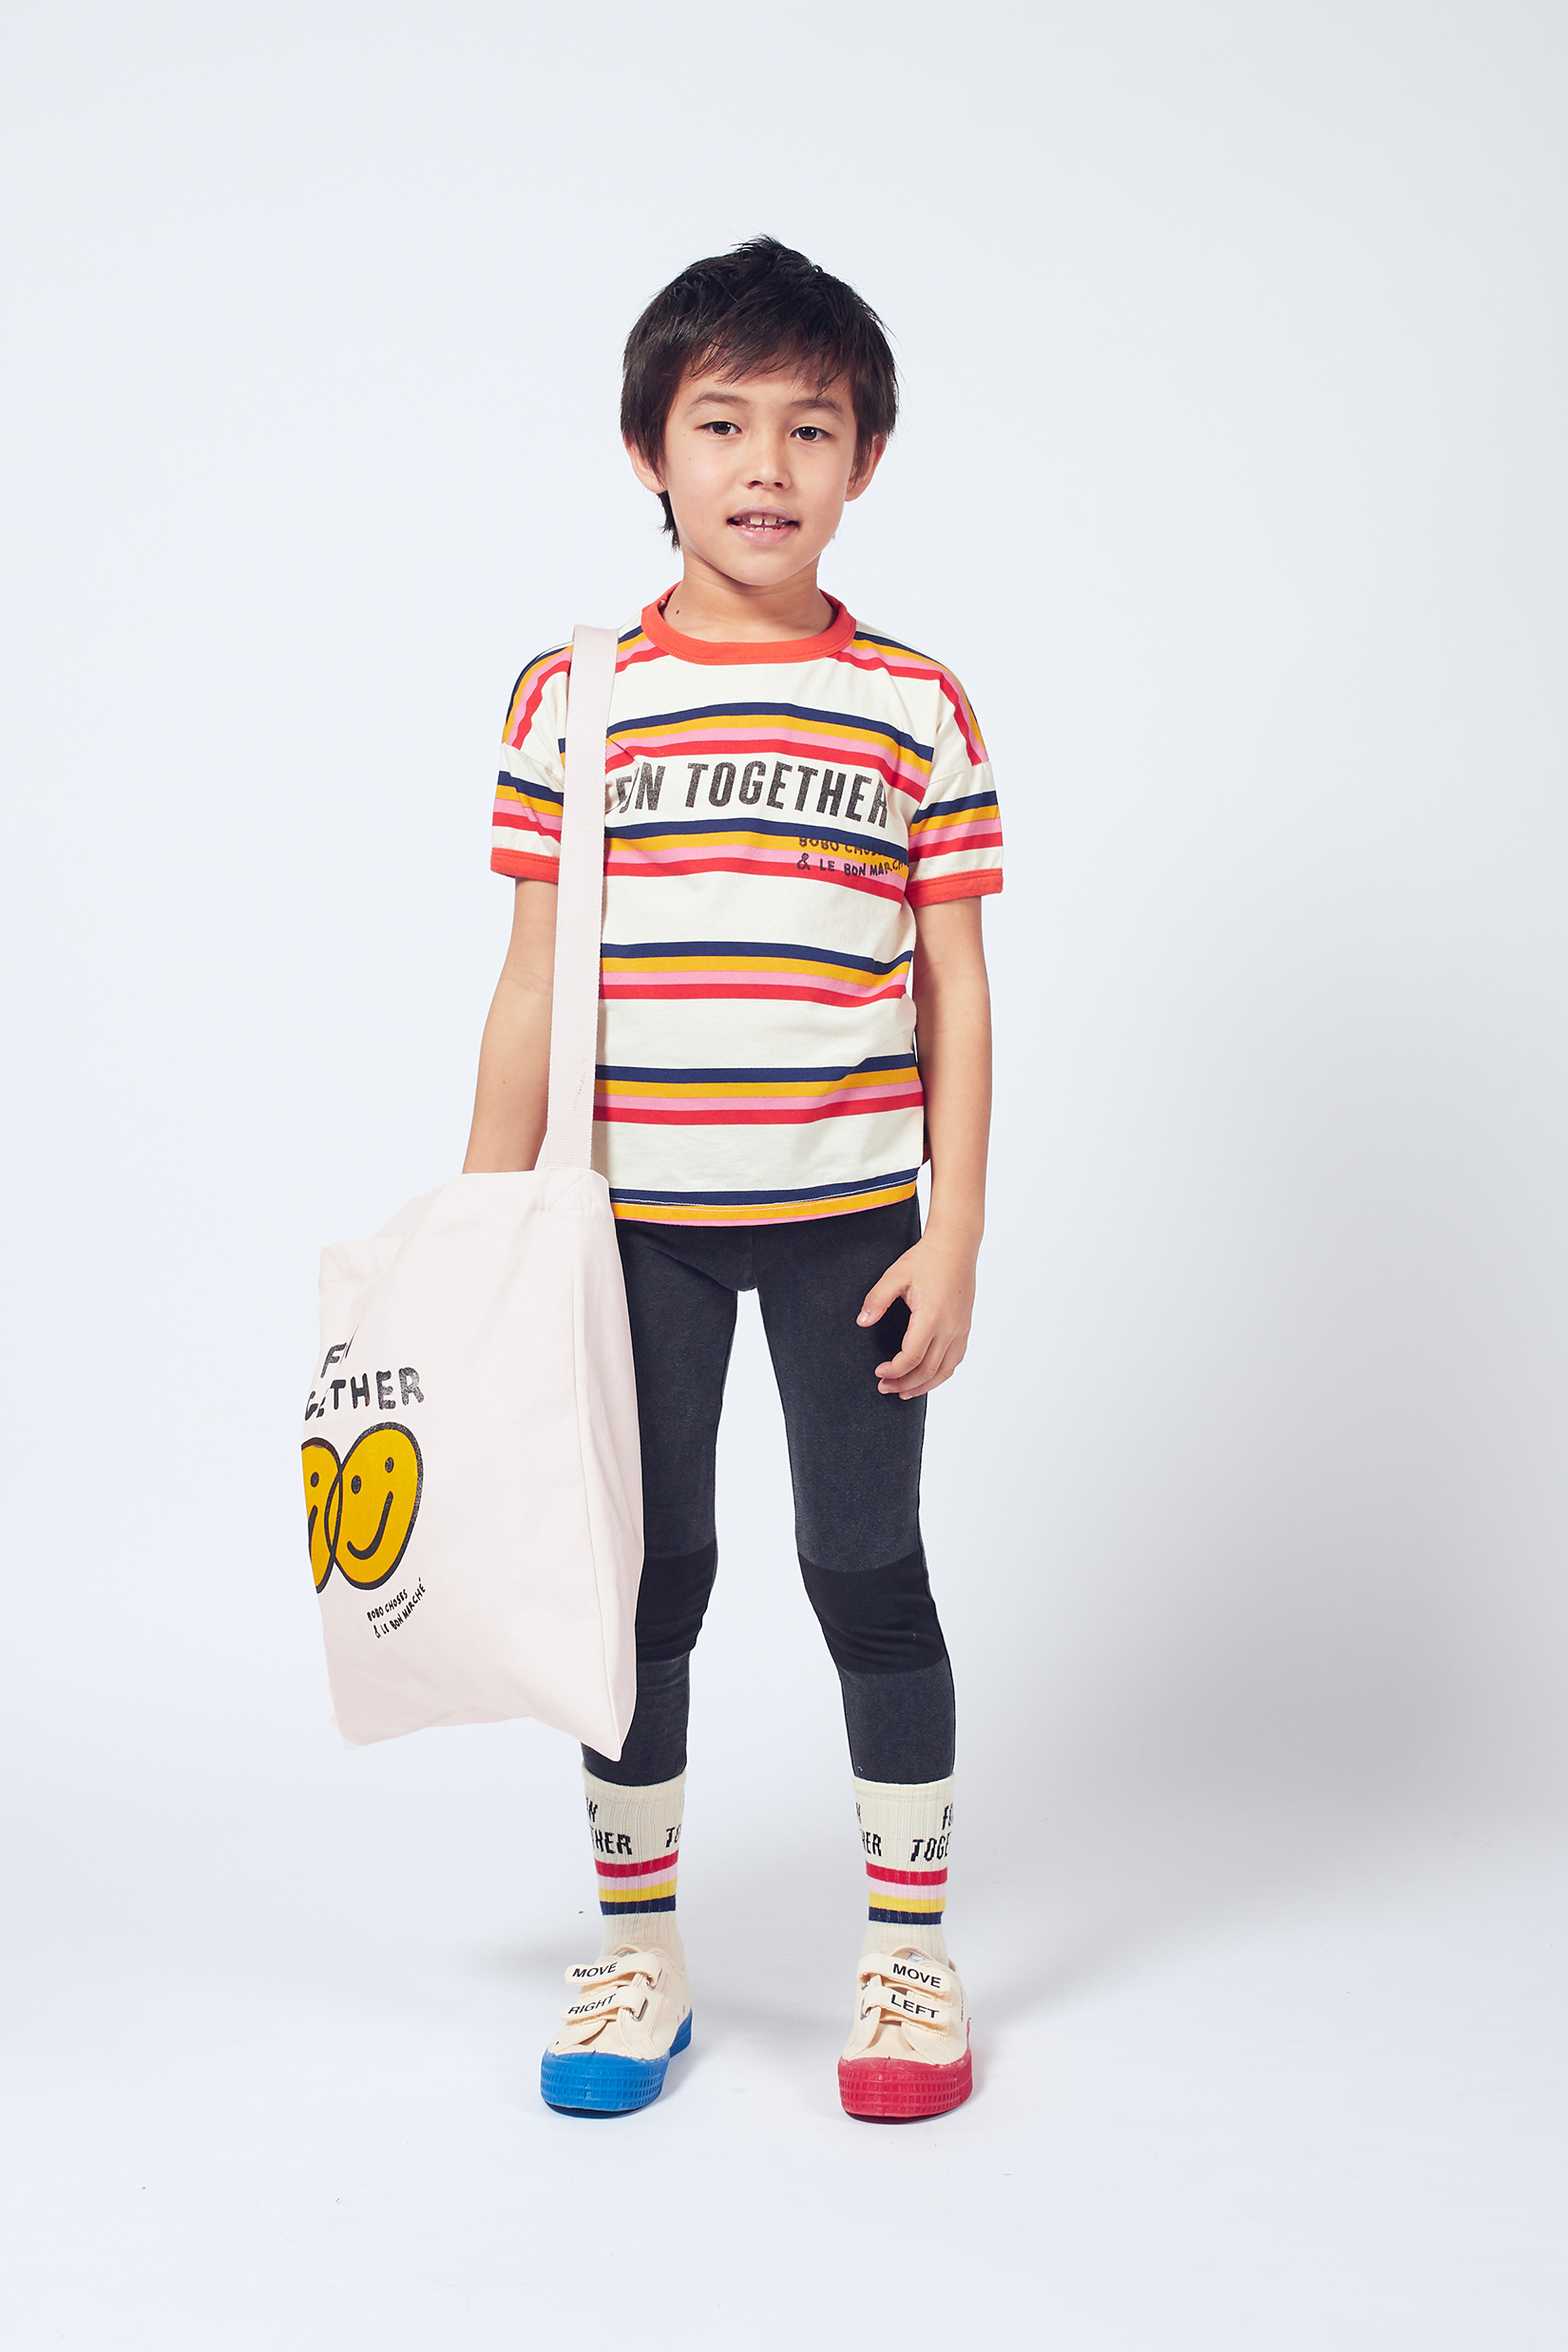 Bobo Choses: Clothing & Accessories - Official Online Store